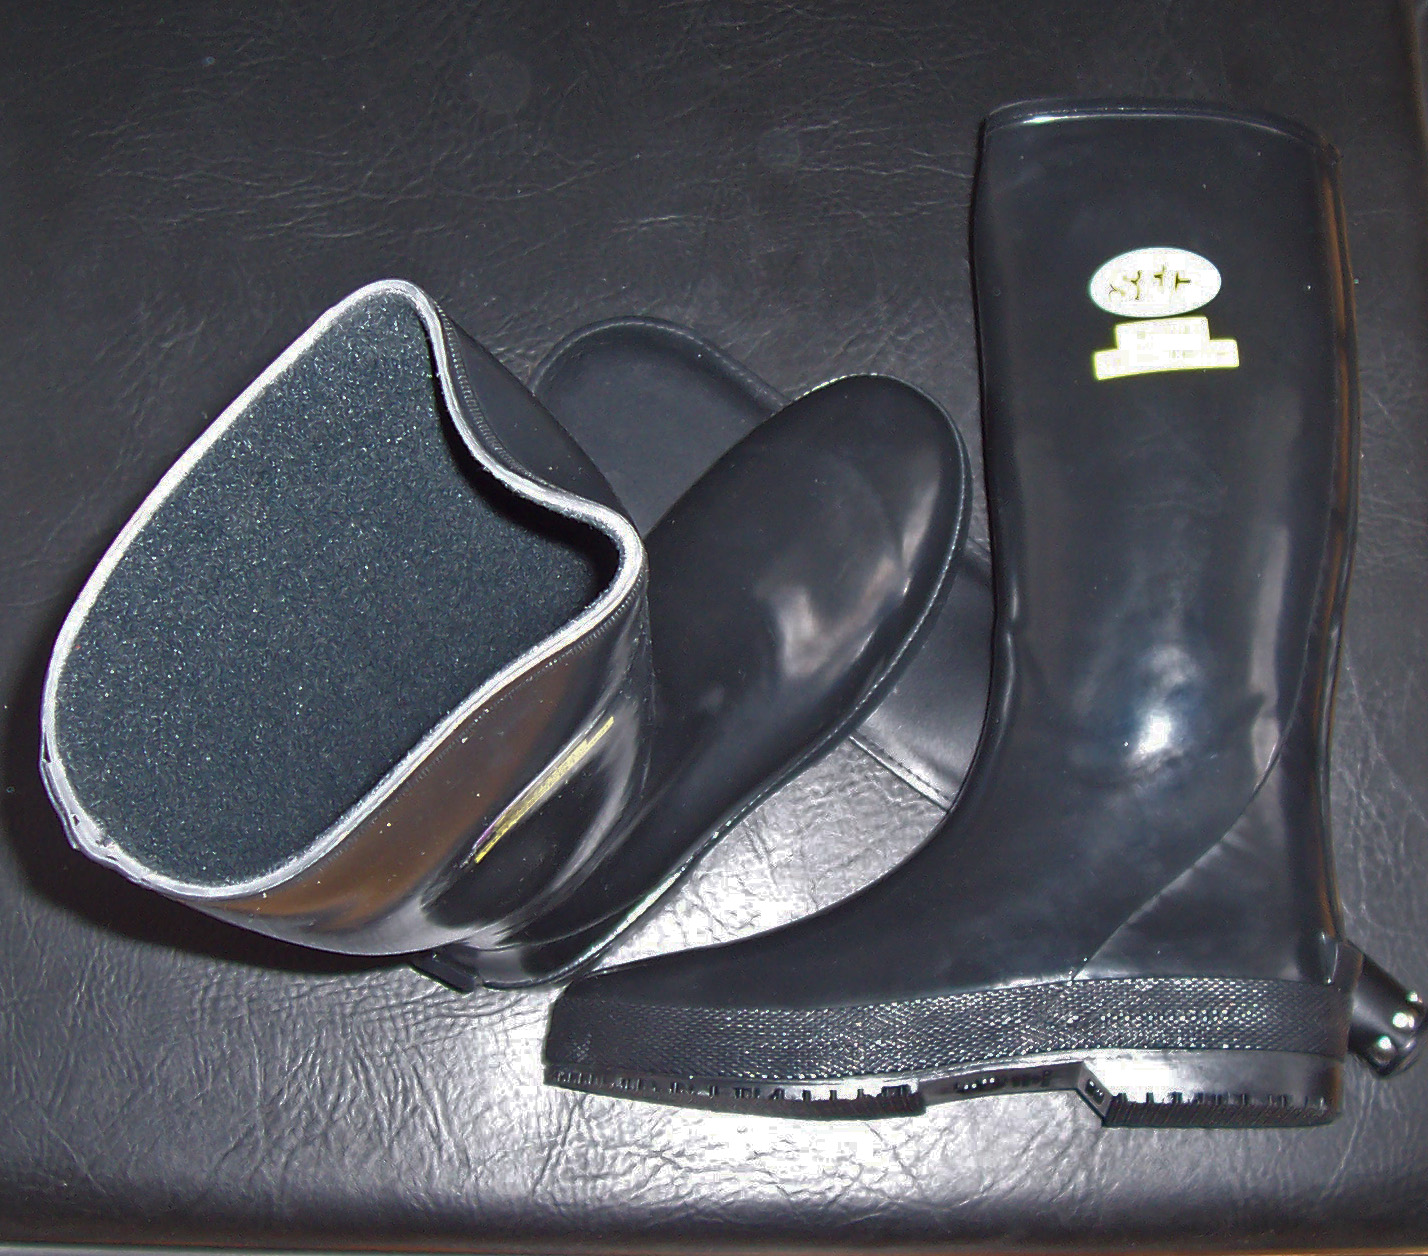 shoes for crews rubber boots